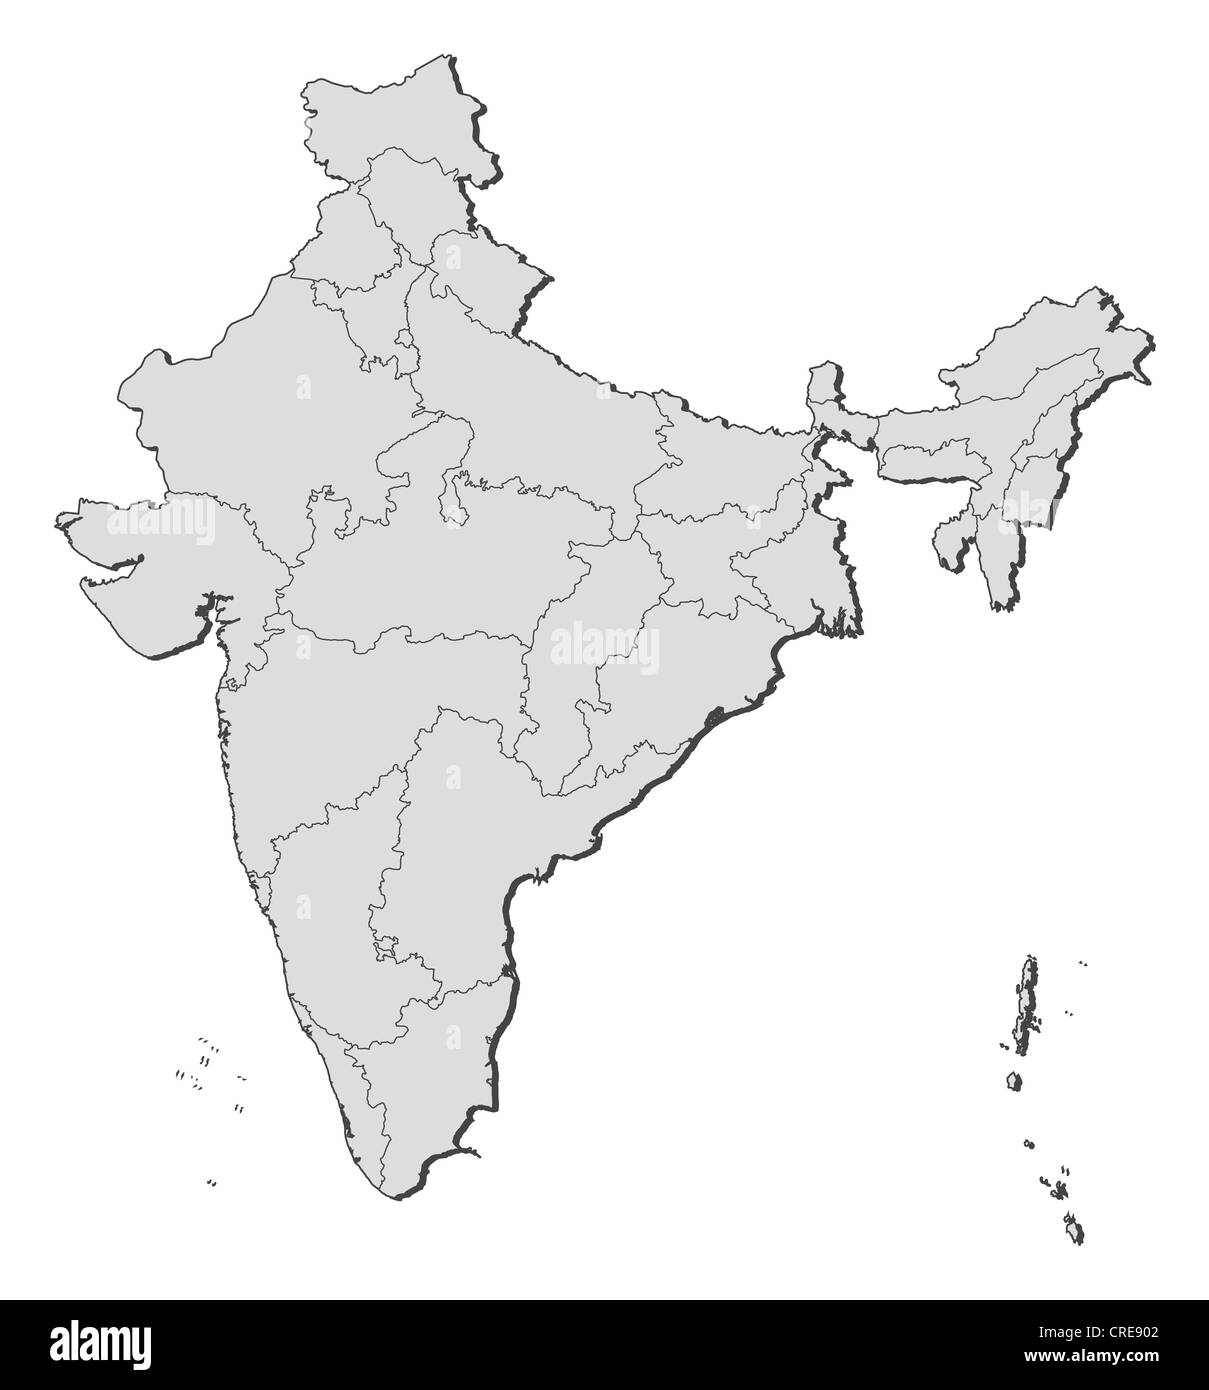 India country outline Black and White Stock Photos Images   Page